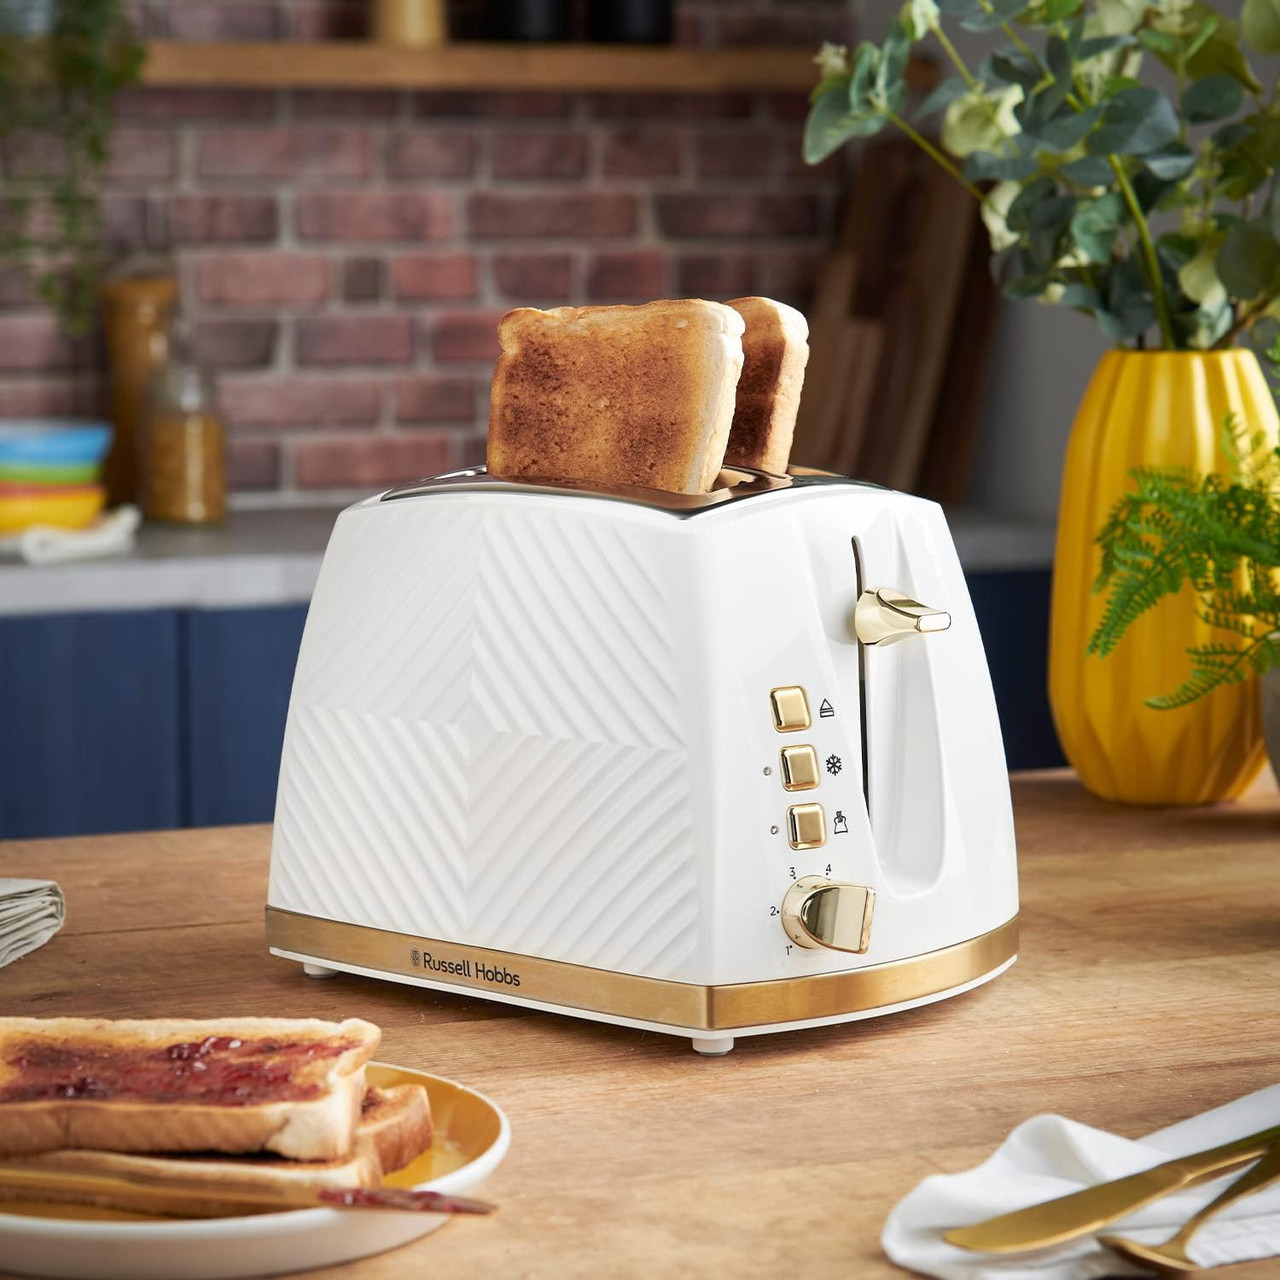 https://cdn11.bigcommerce.com/s-8ek7z3h3jn/images/stencil/1280x1280/products/9205/51555/russell-hobbs-groove-2-slice-toaster-white-or-26391__75244.1691734645.jpg?c=1?imbypass=on